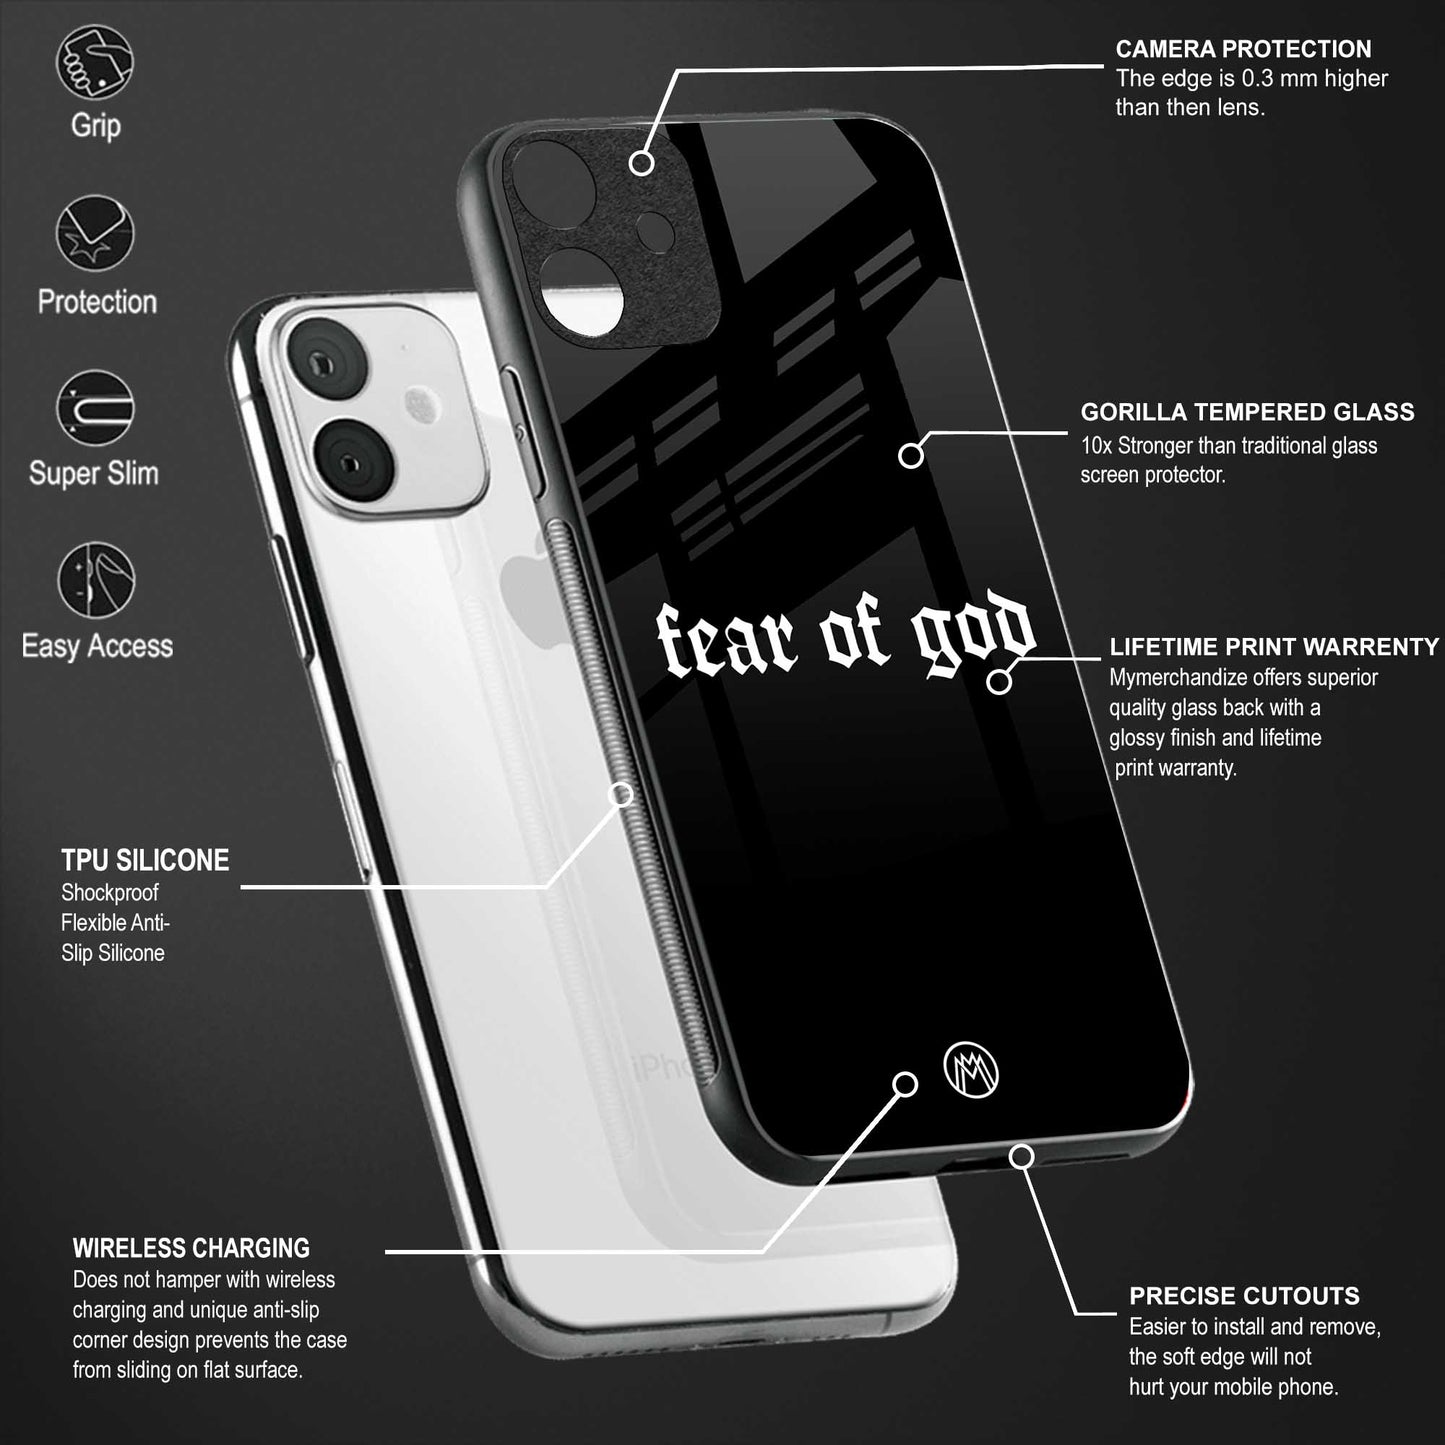 fear of god phone cover for redmi k20